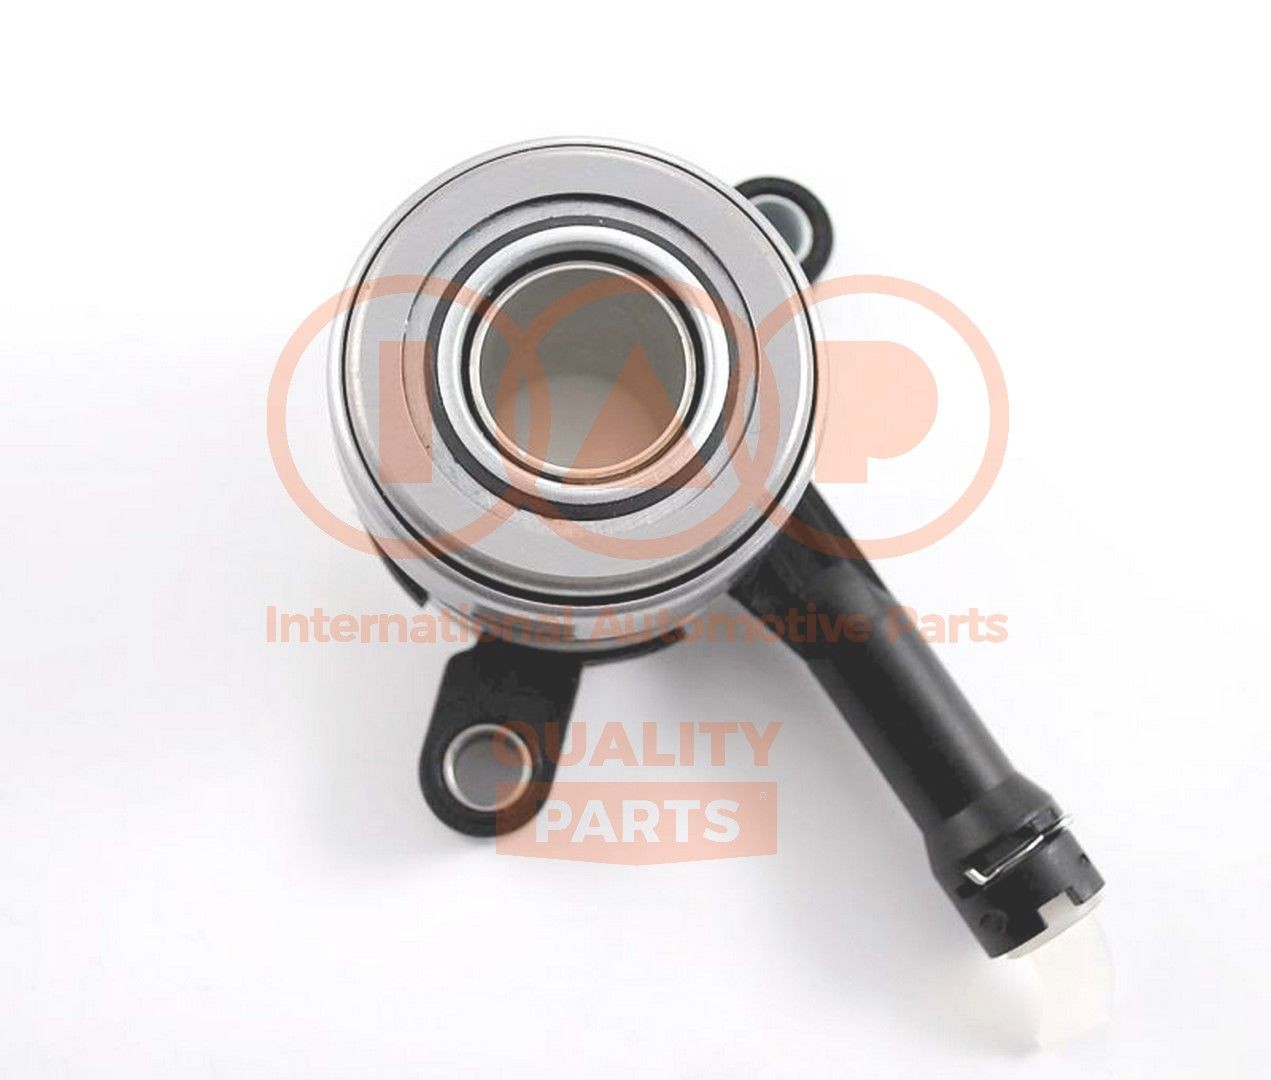 IAP QUALITY PARTS Clutch release bearing 204-13161 Renault MASTER 2000